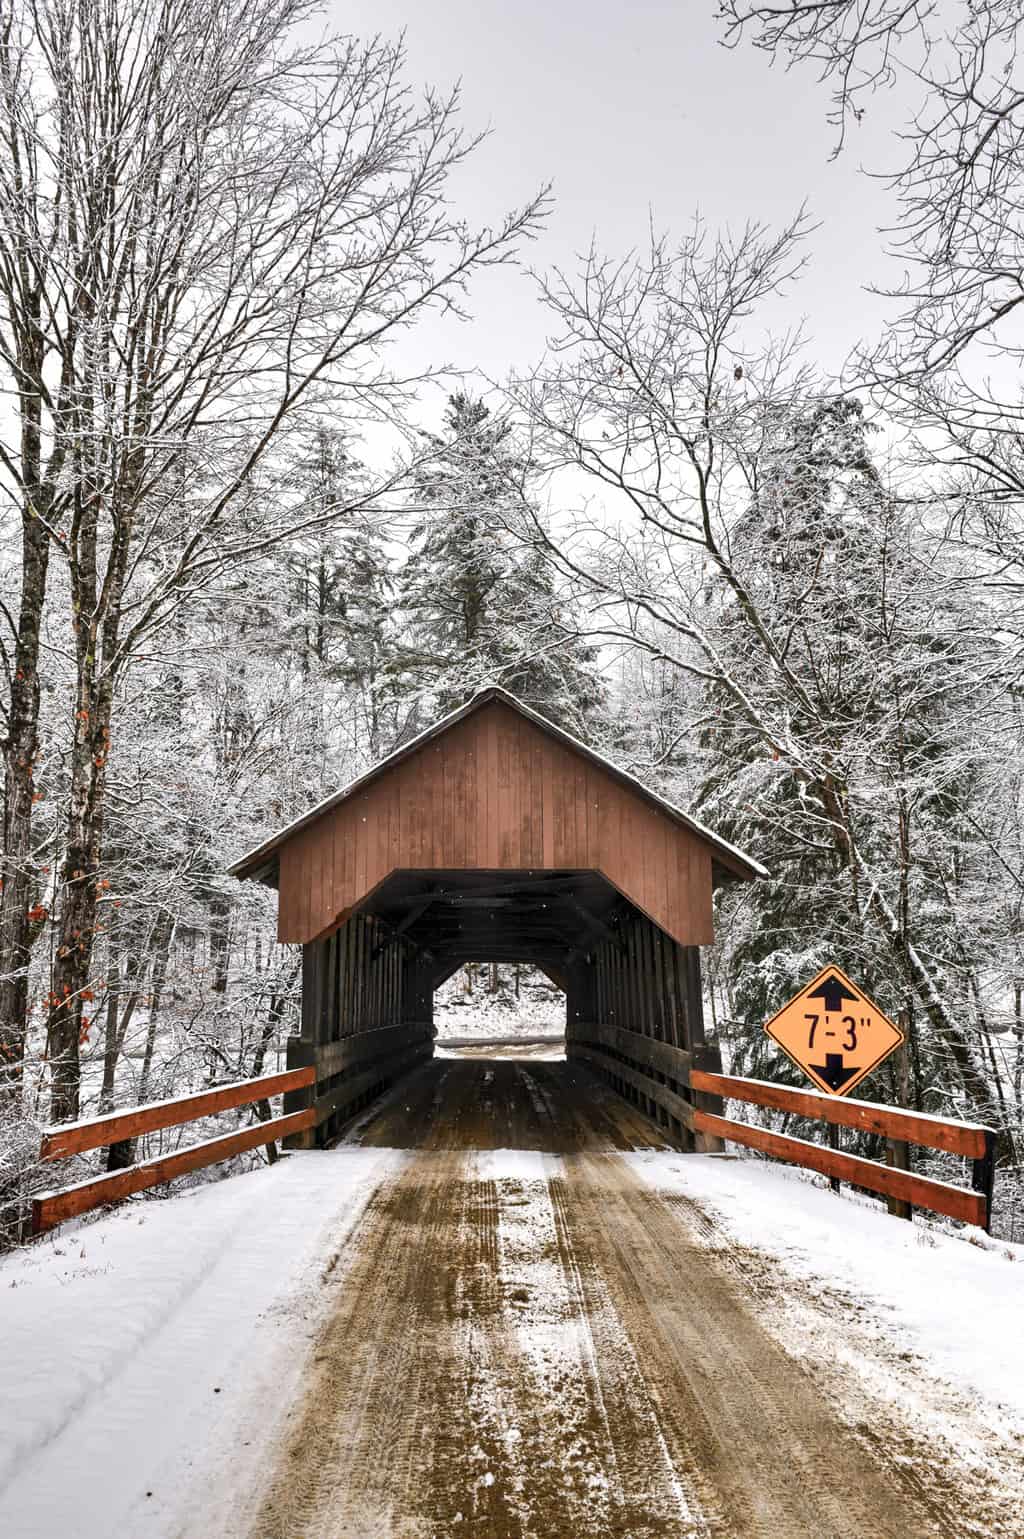 Wooden covered bridge in a snowy landscape in New Hampshire.